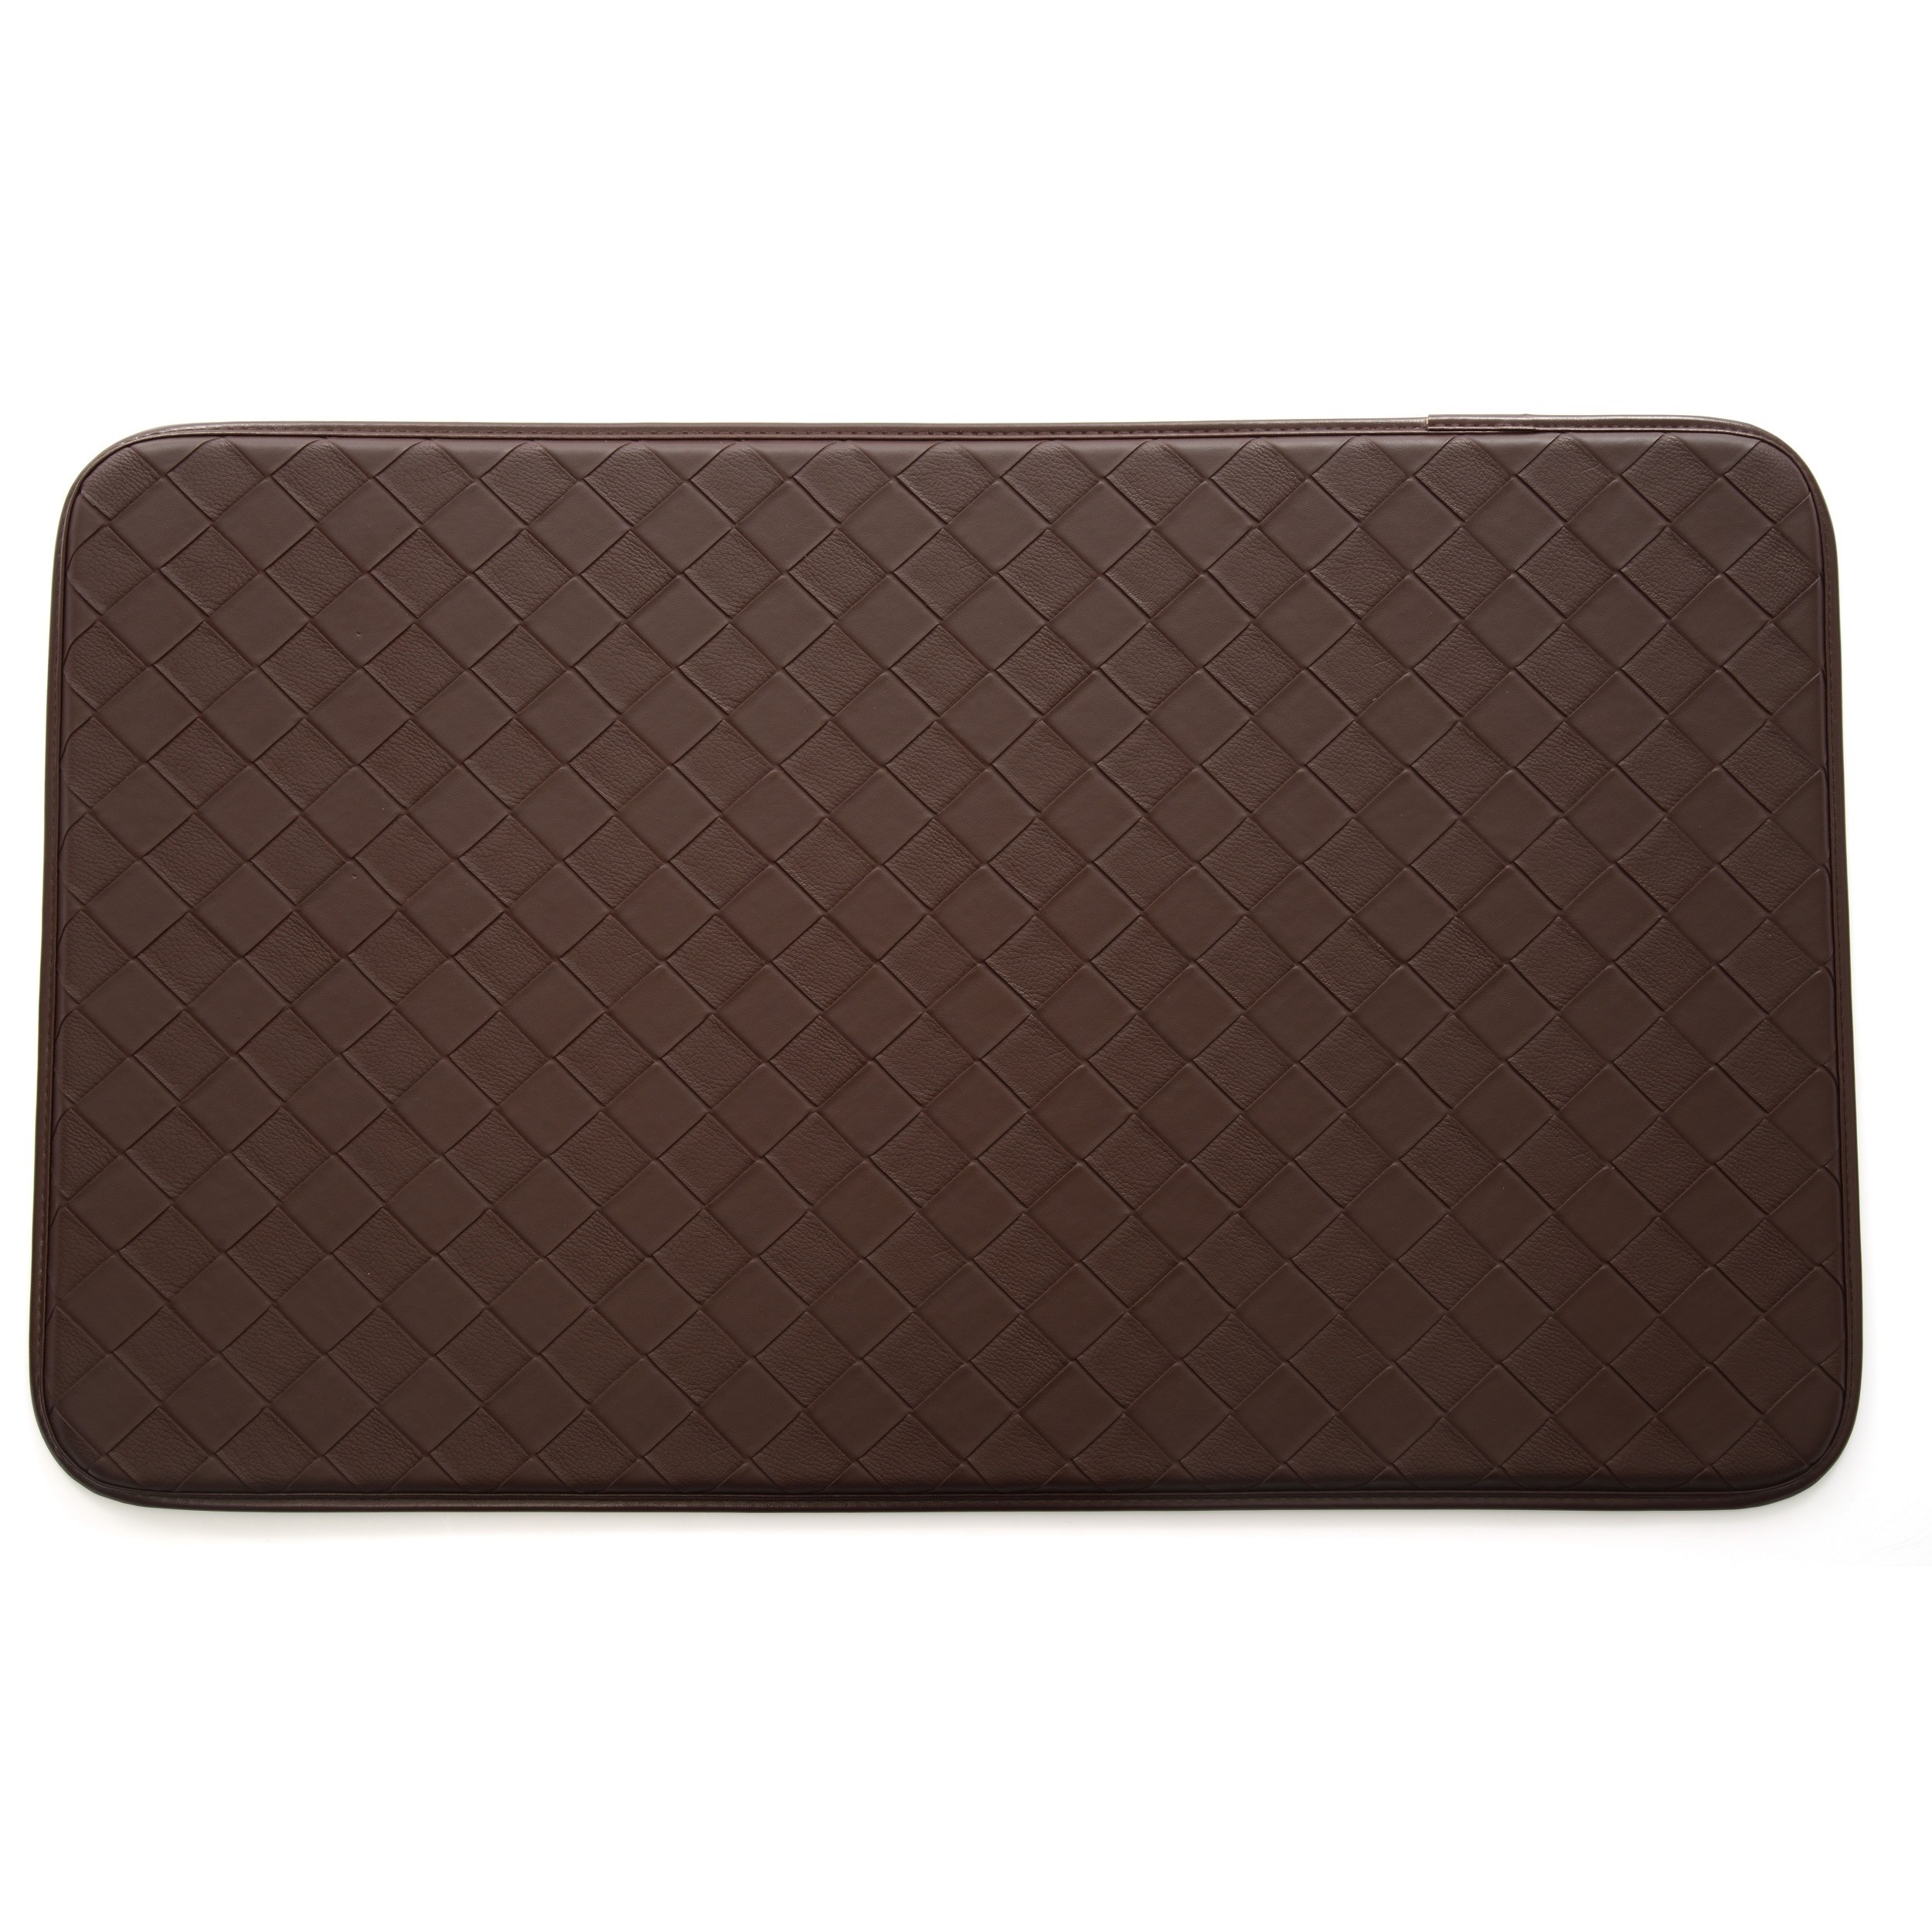 Shop Black Friday Deals On Stephan Roberts Faux Leather Anti Fatigue Kitchen Mat 30 Inches X 18 Inches On Sale Overstock 11654927